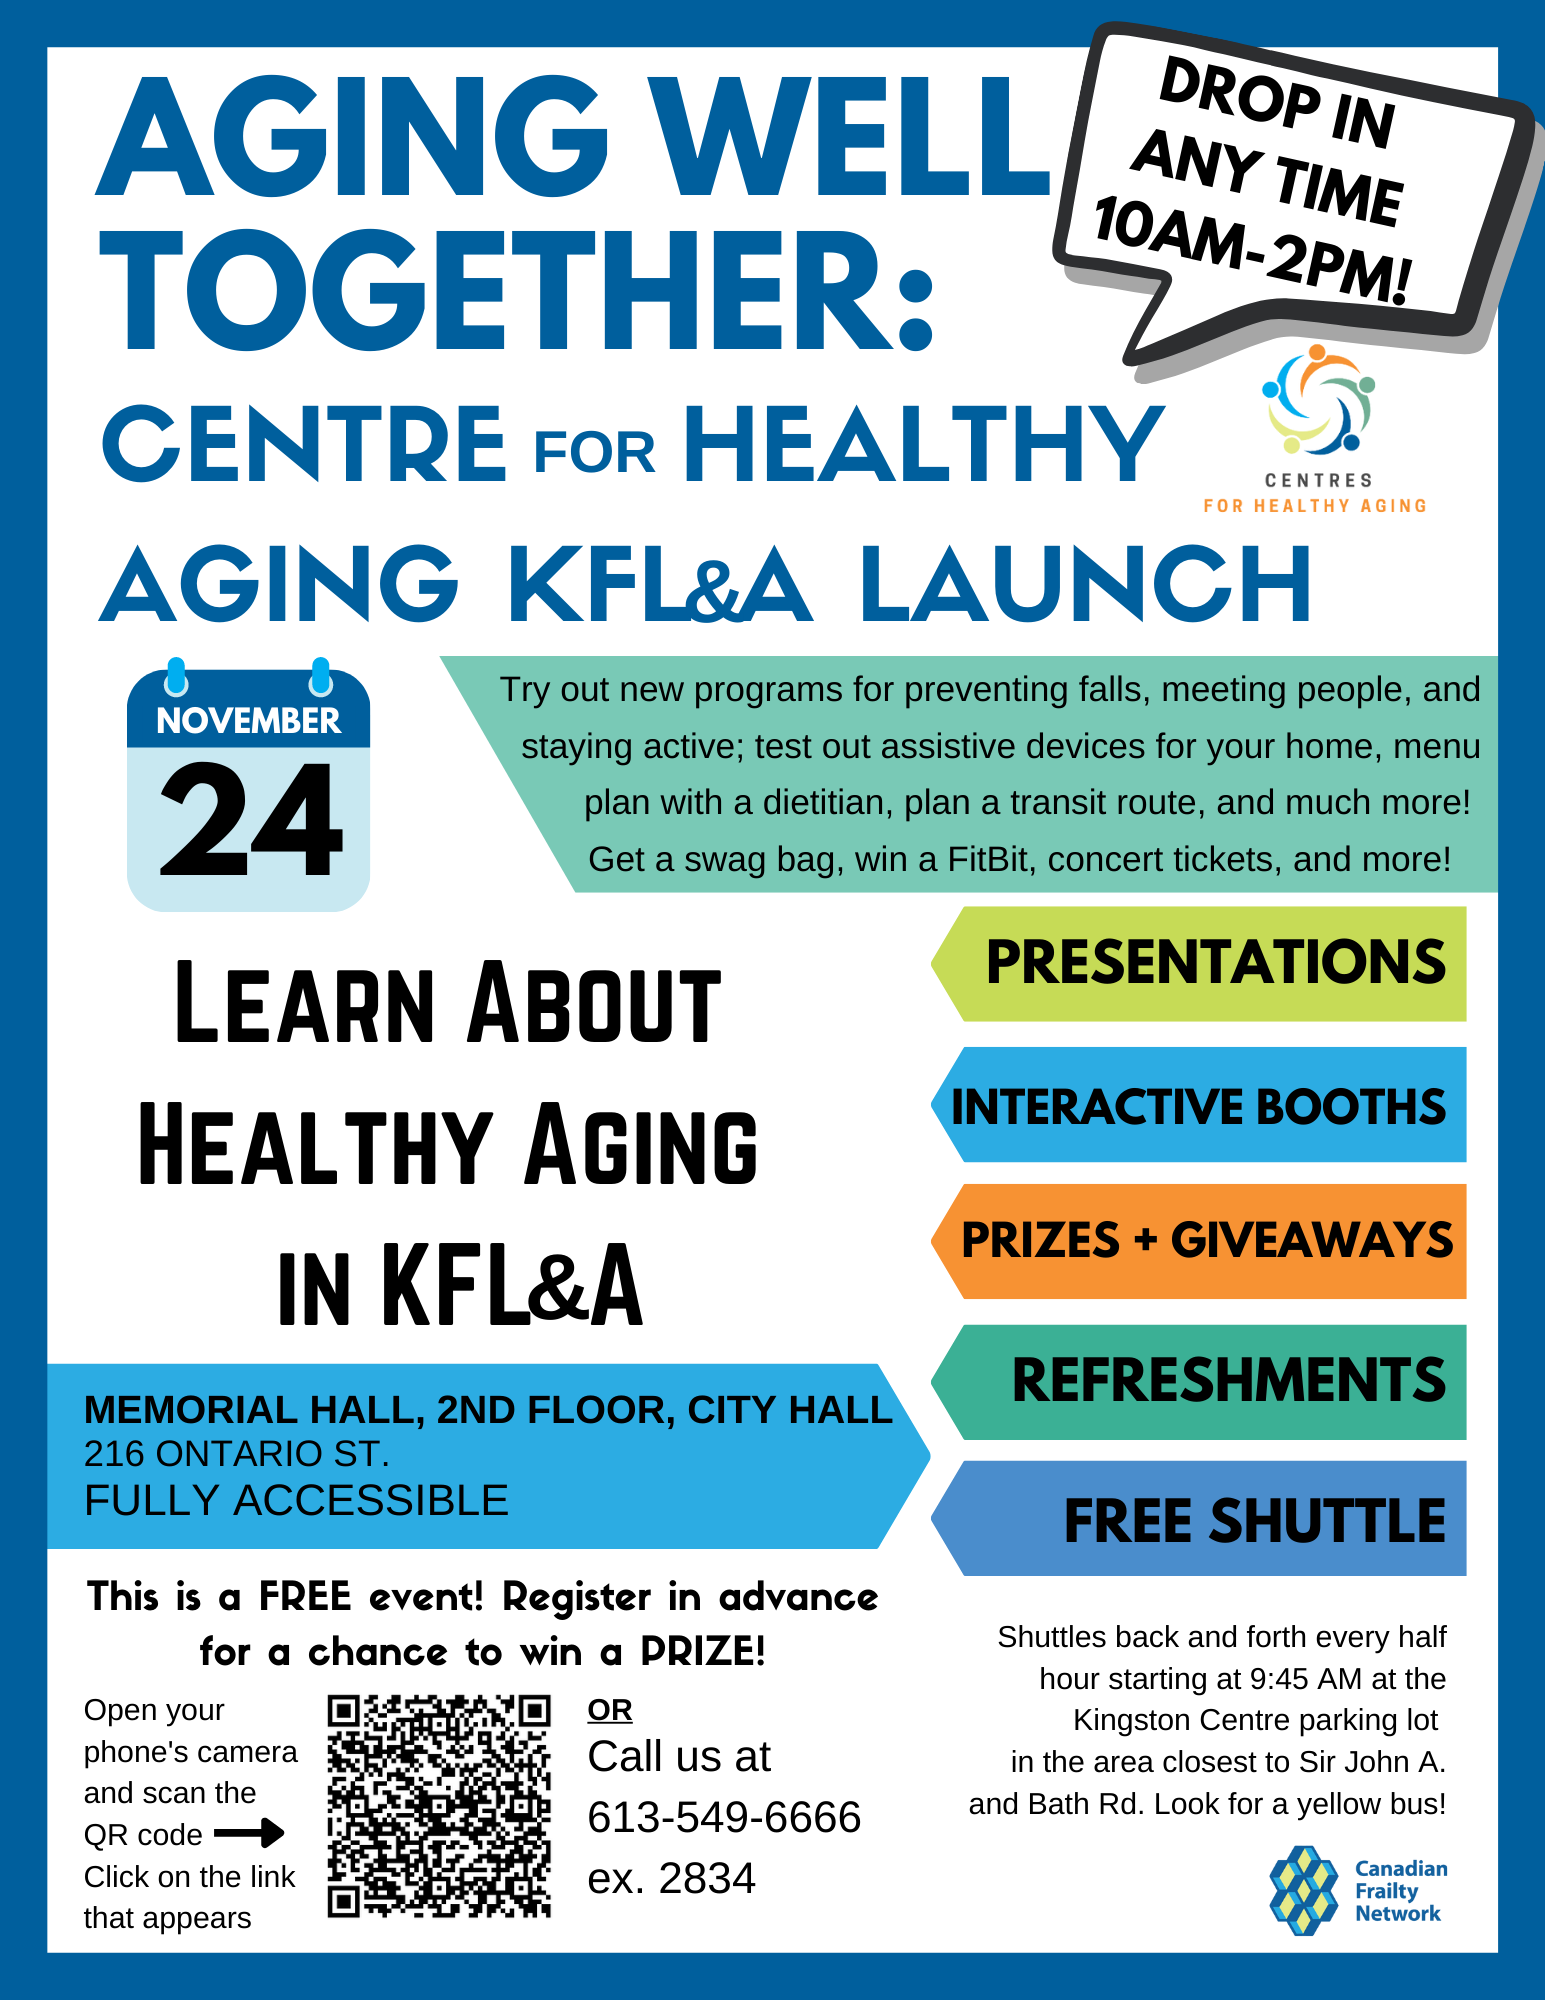 Aging Well Together: Learn About Healthy Aging in Kfl&A